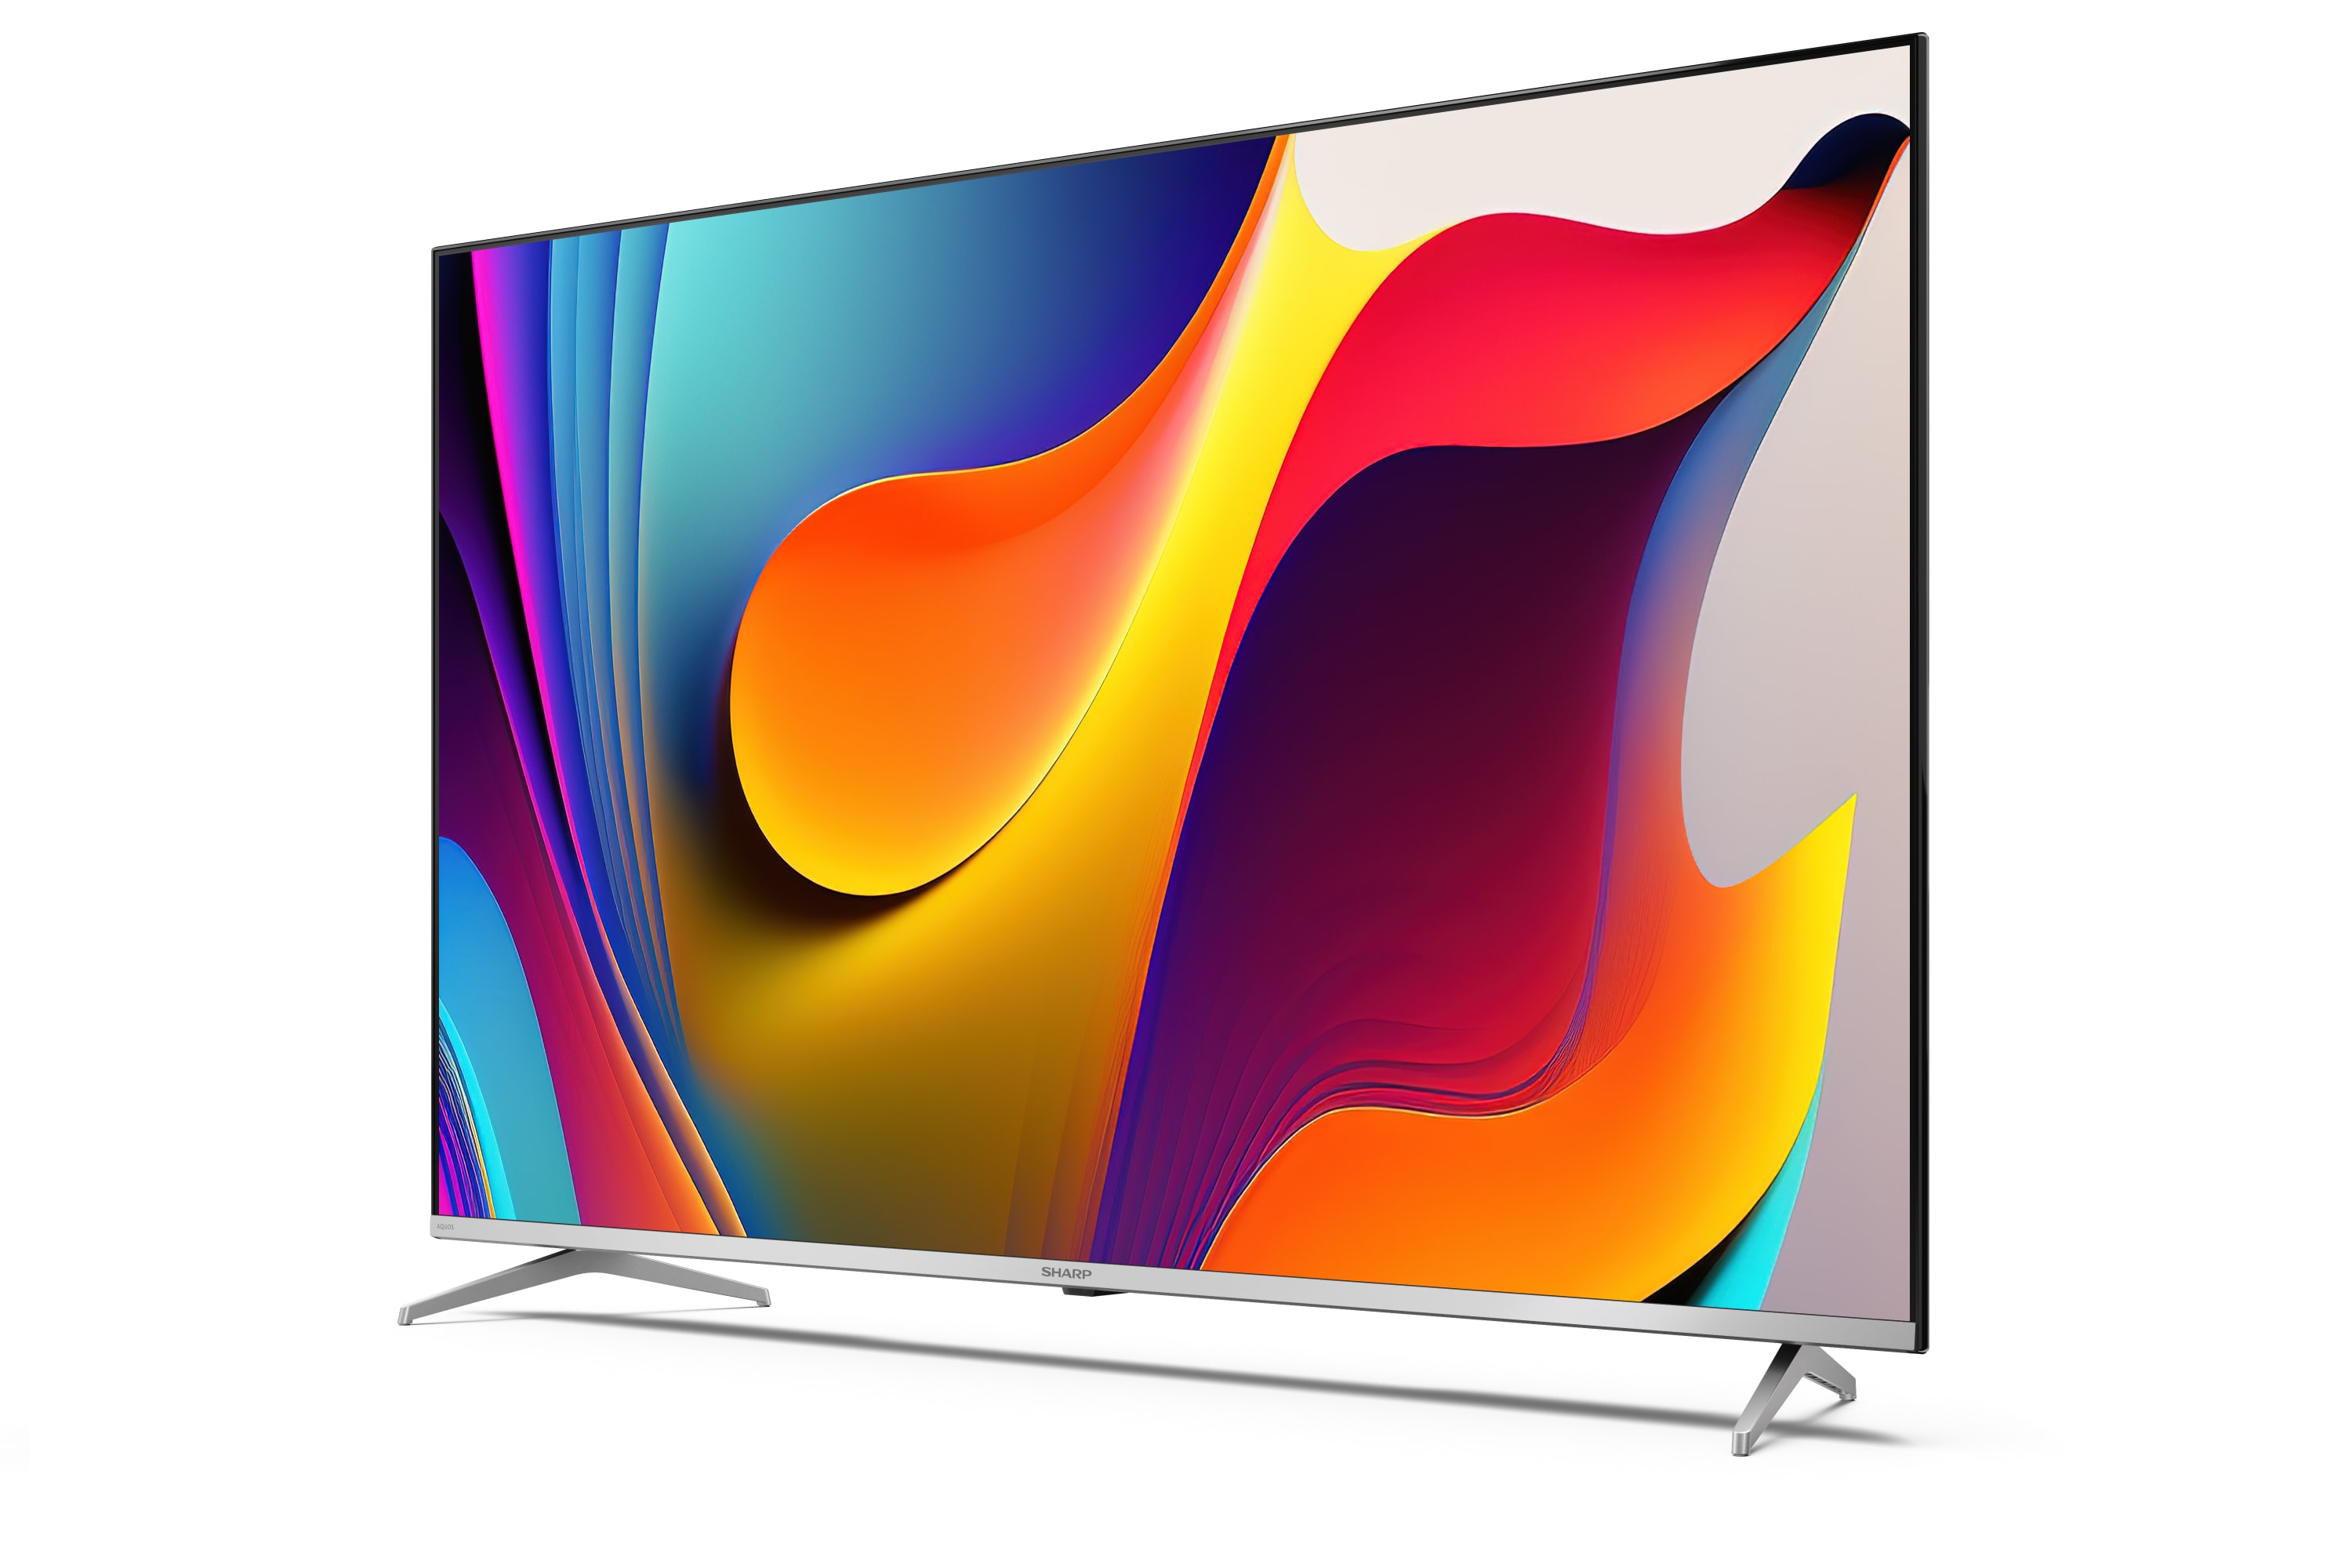 Android TV 4K UHD - ANDROID TV™ SHARP 50" 4K ULTRA HD QUANTUM DOT